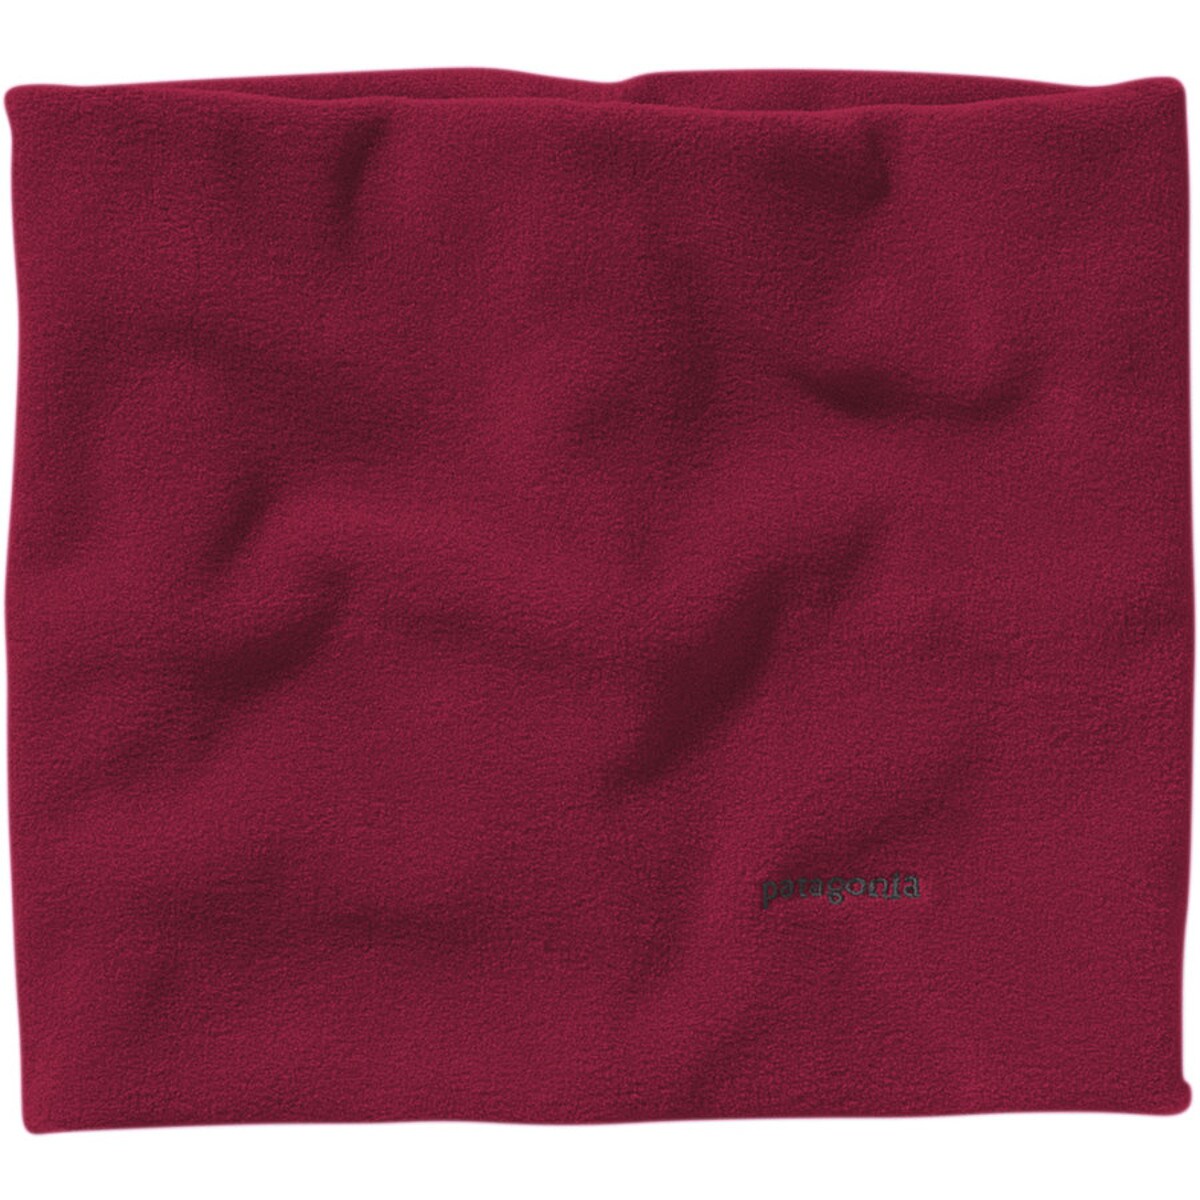 Patagonia Micro-D Neck Gaiter Wax Red